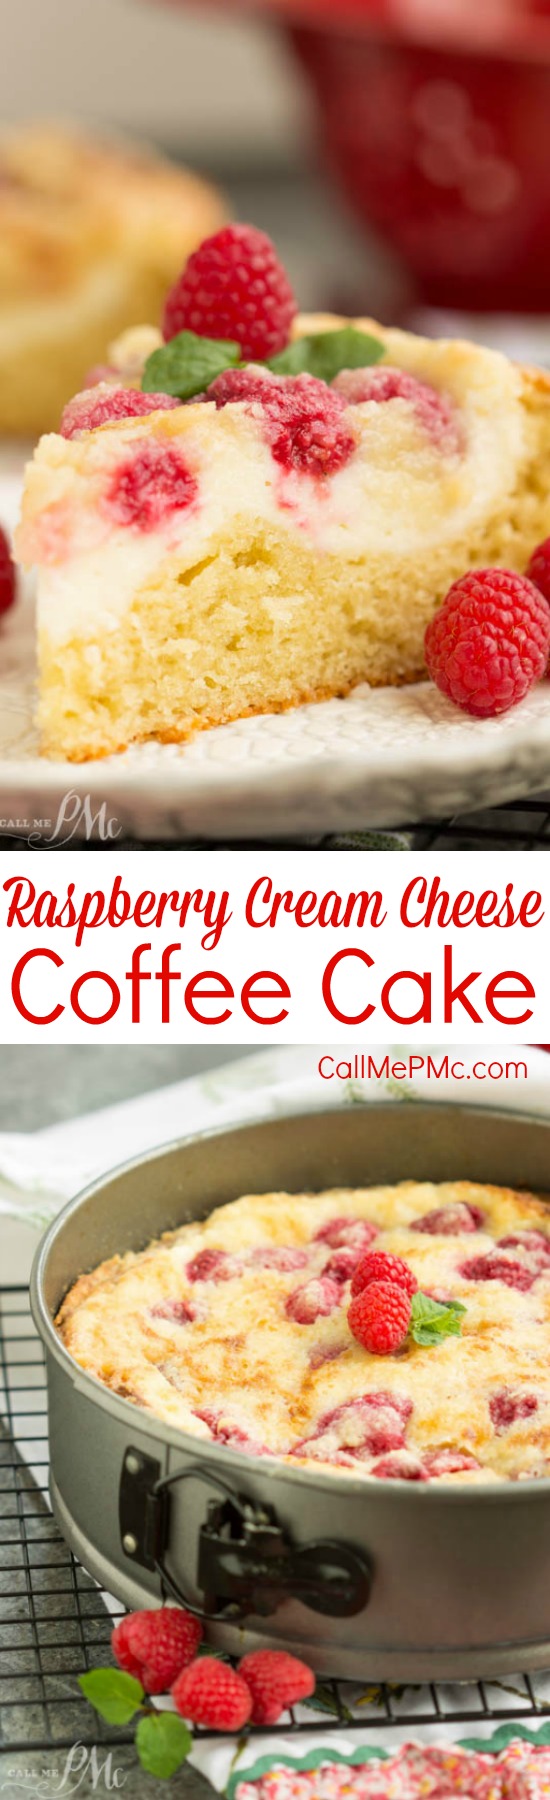 Raspberry Streusel Cream Cheese Coffee Cake is moist and tender with a ribbon of cream cheese and fresh raspberries running through it